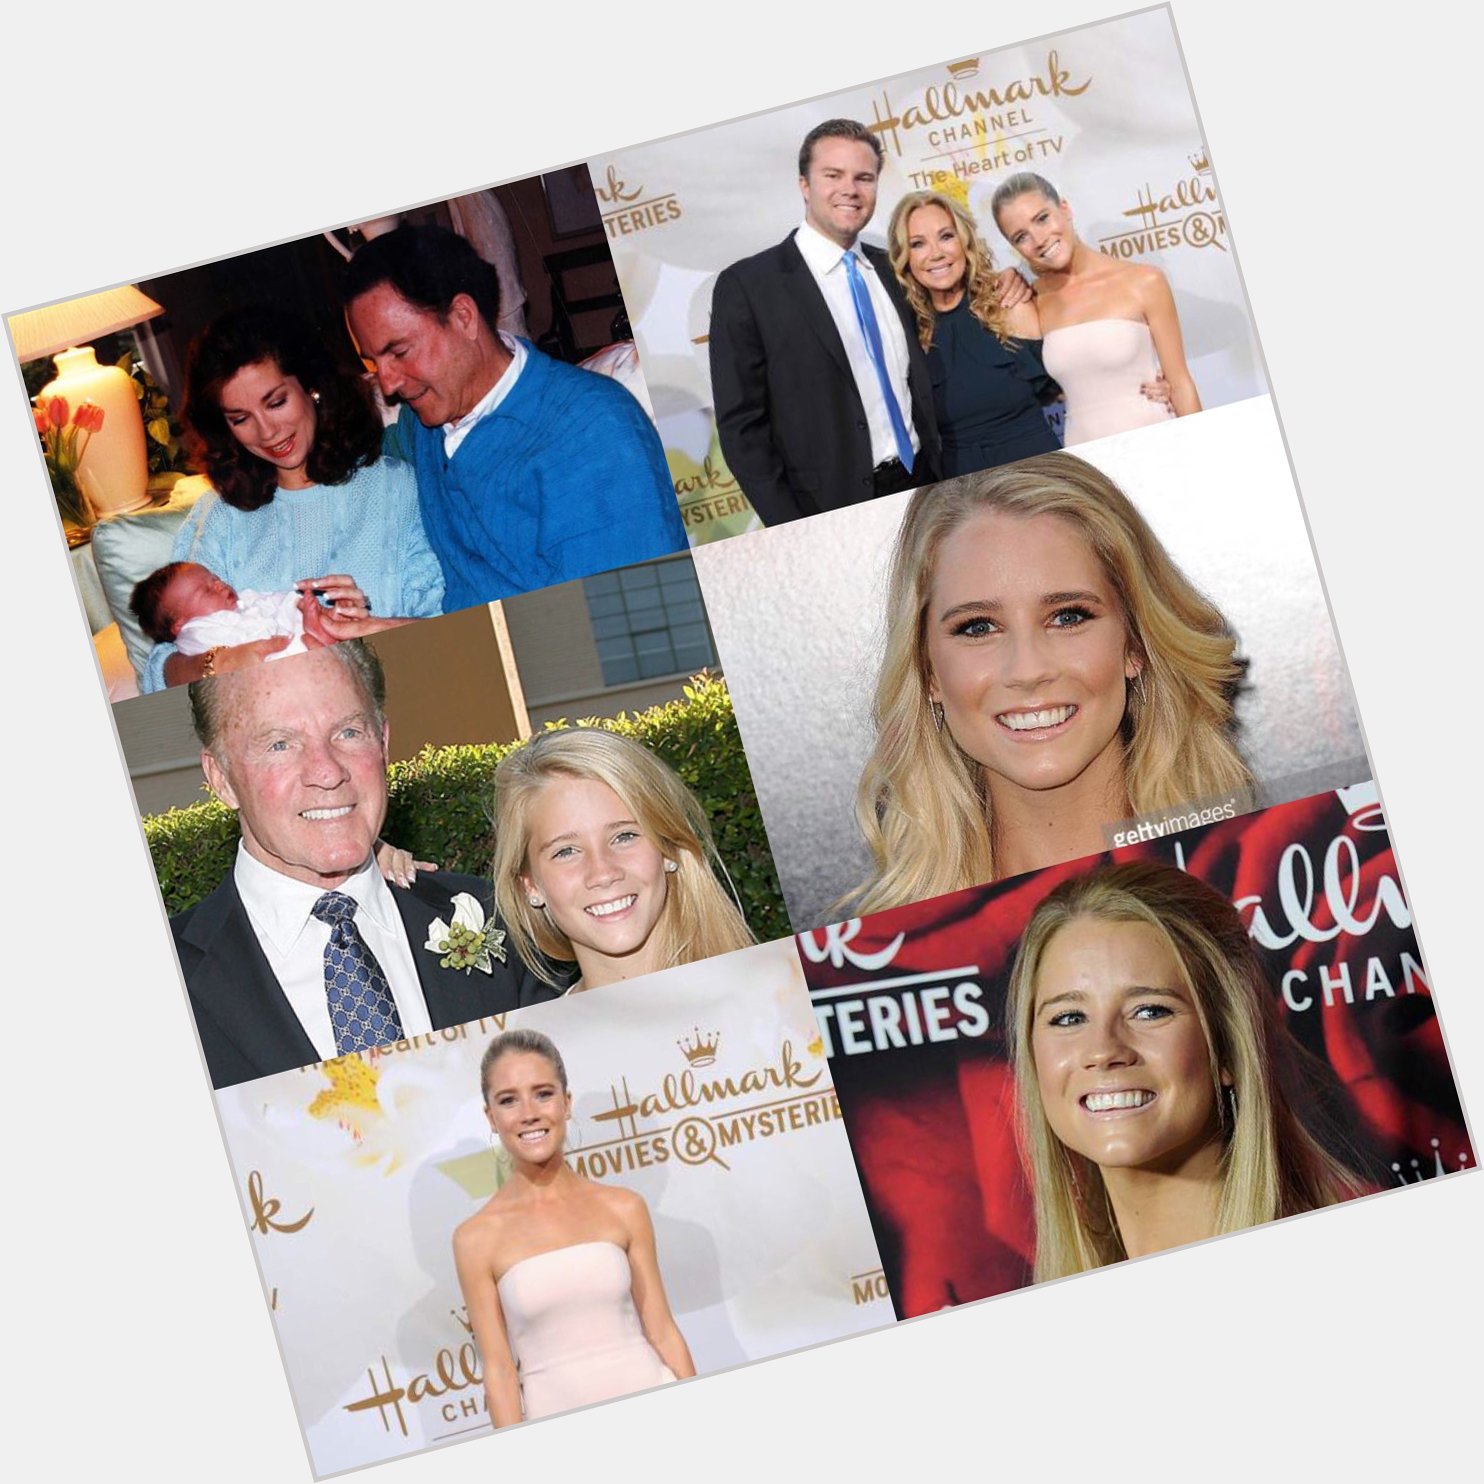 Happy 24 birthday to Cassidy gifford. Hope that she as a wonderful birthday. God bless.     